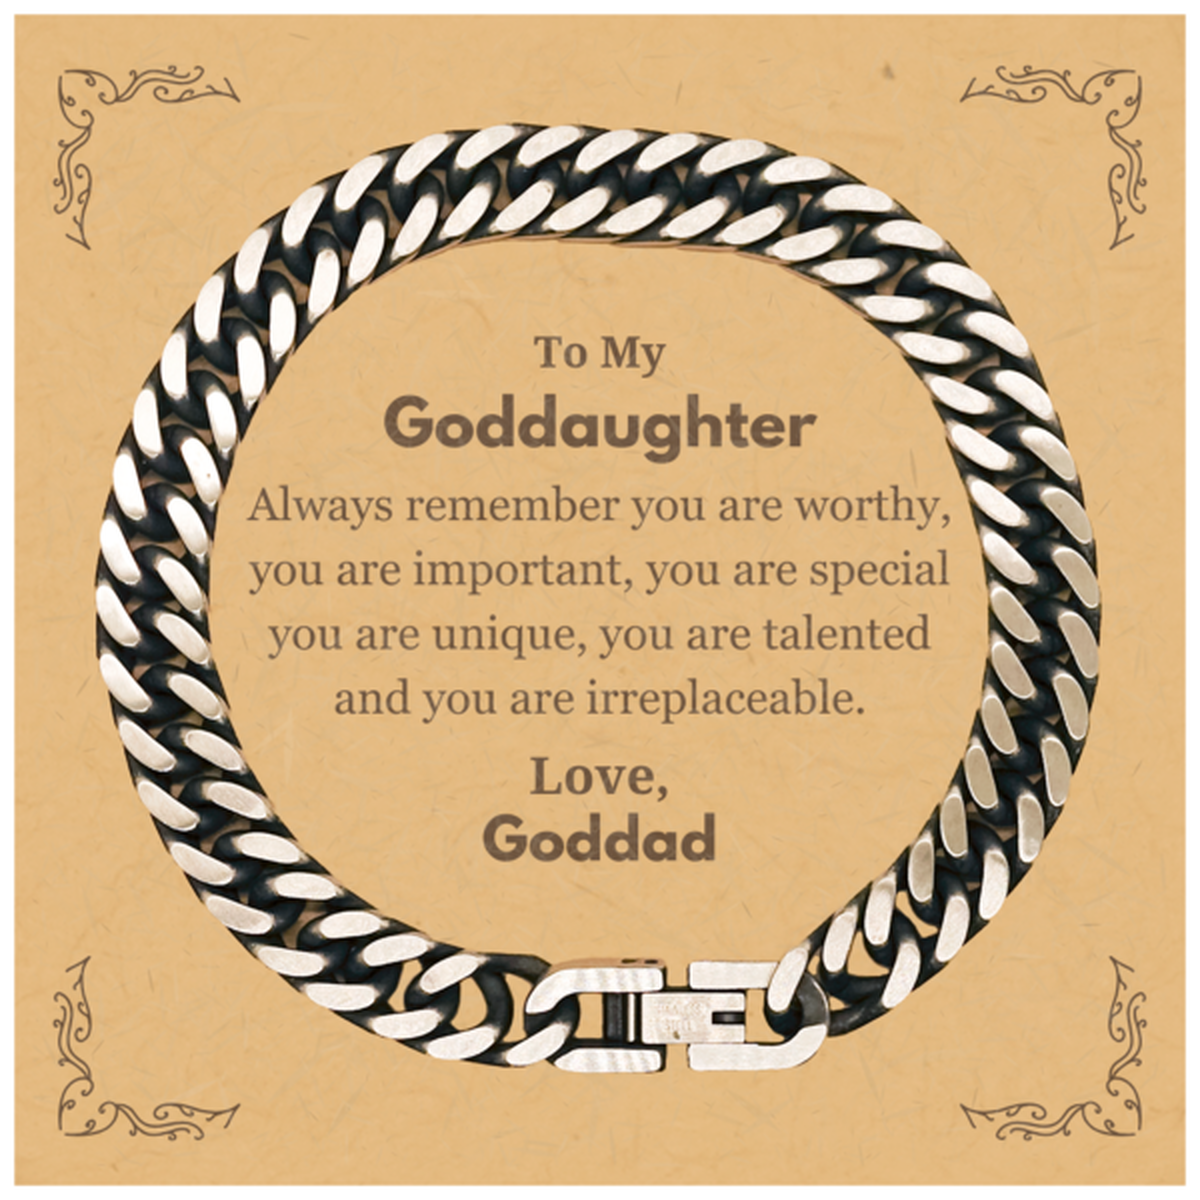 Goddaughter Birthday Gifts from Goddad, Inspirational Cuban Link Chain Bracelet for Goddaughter Christmas Graduation Gifts for Goddaughter Always remember you are worthy, you are important. Love, Goddad